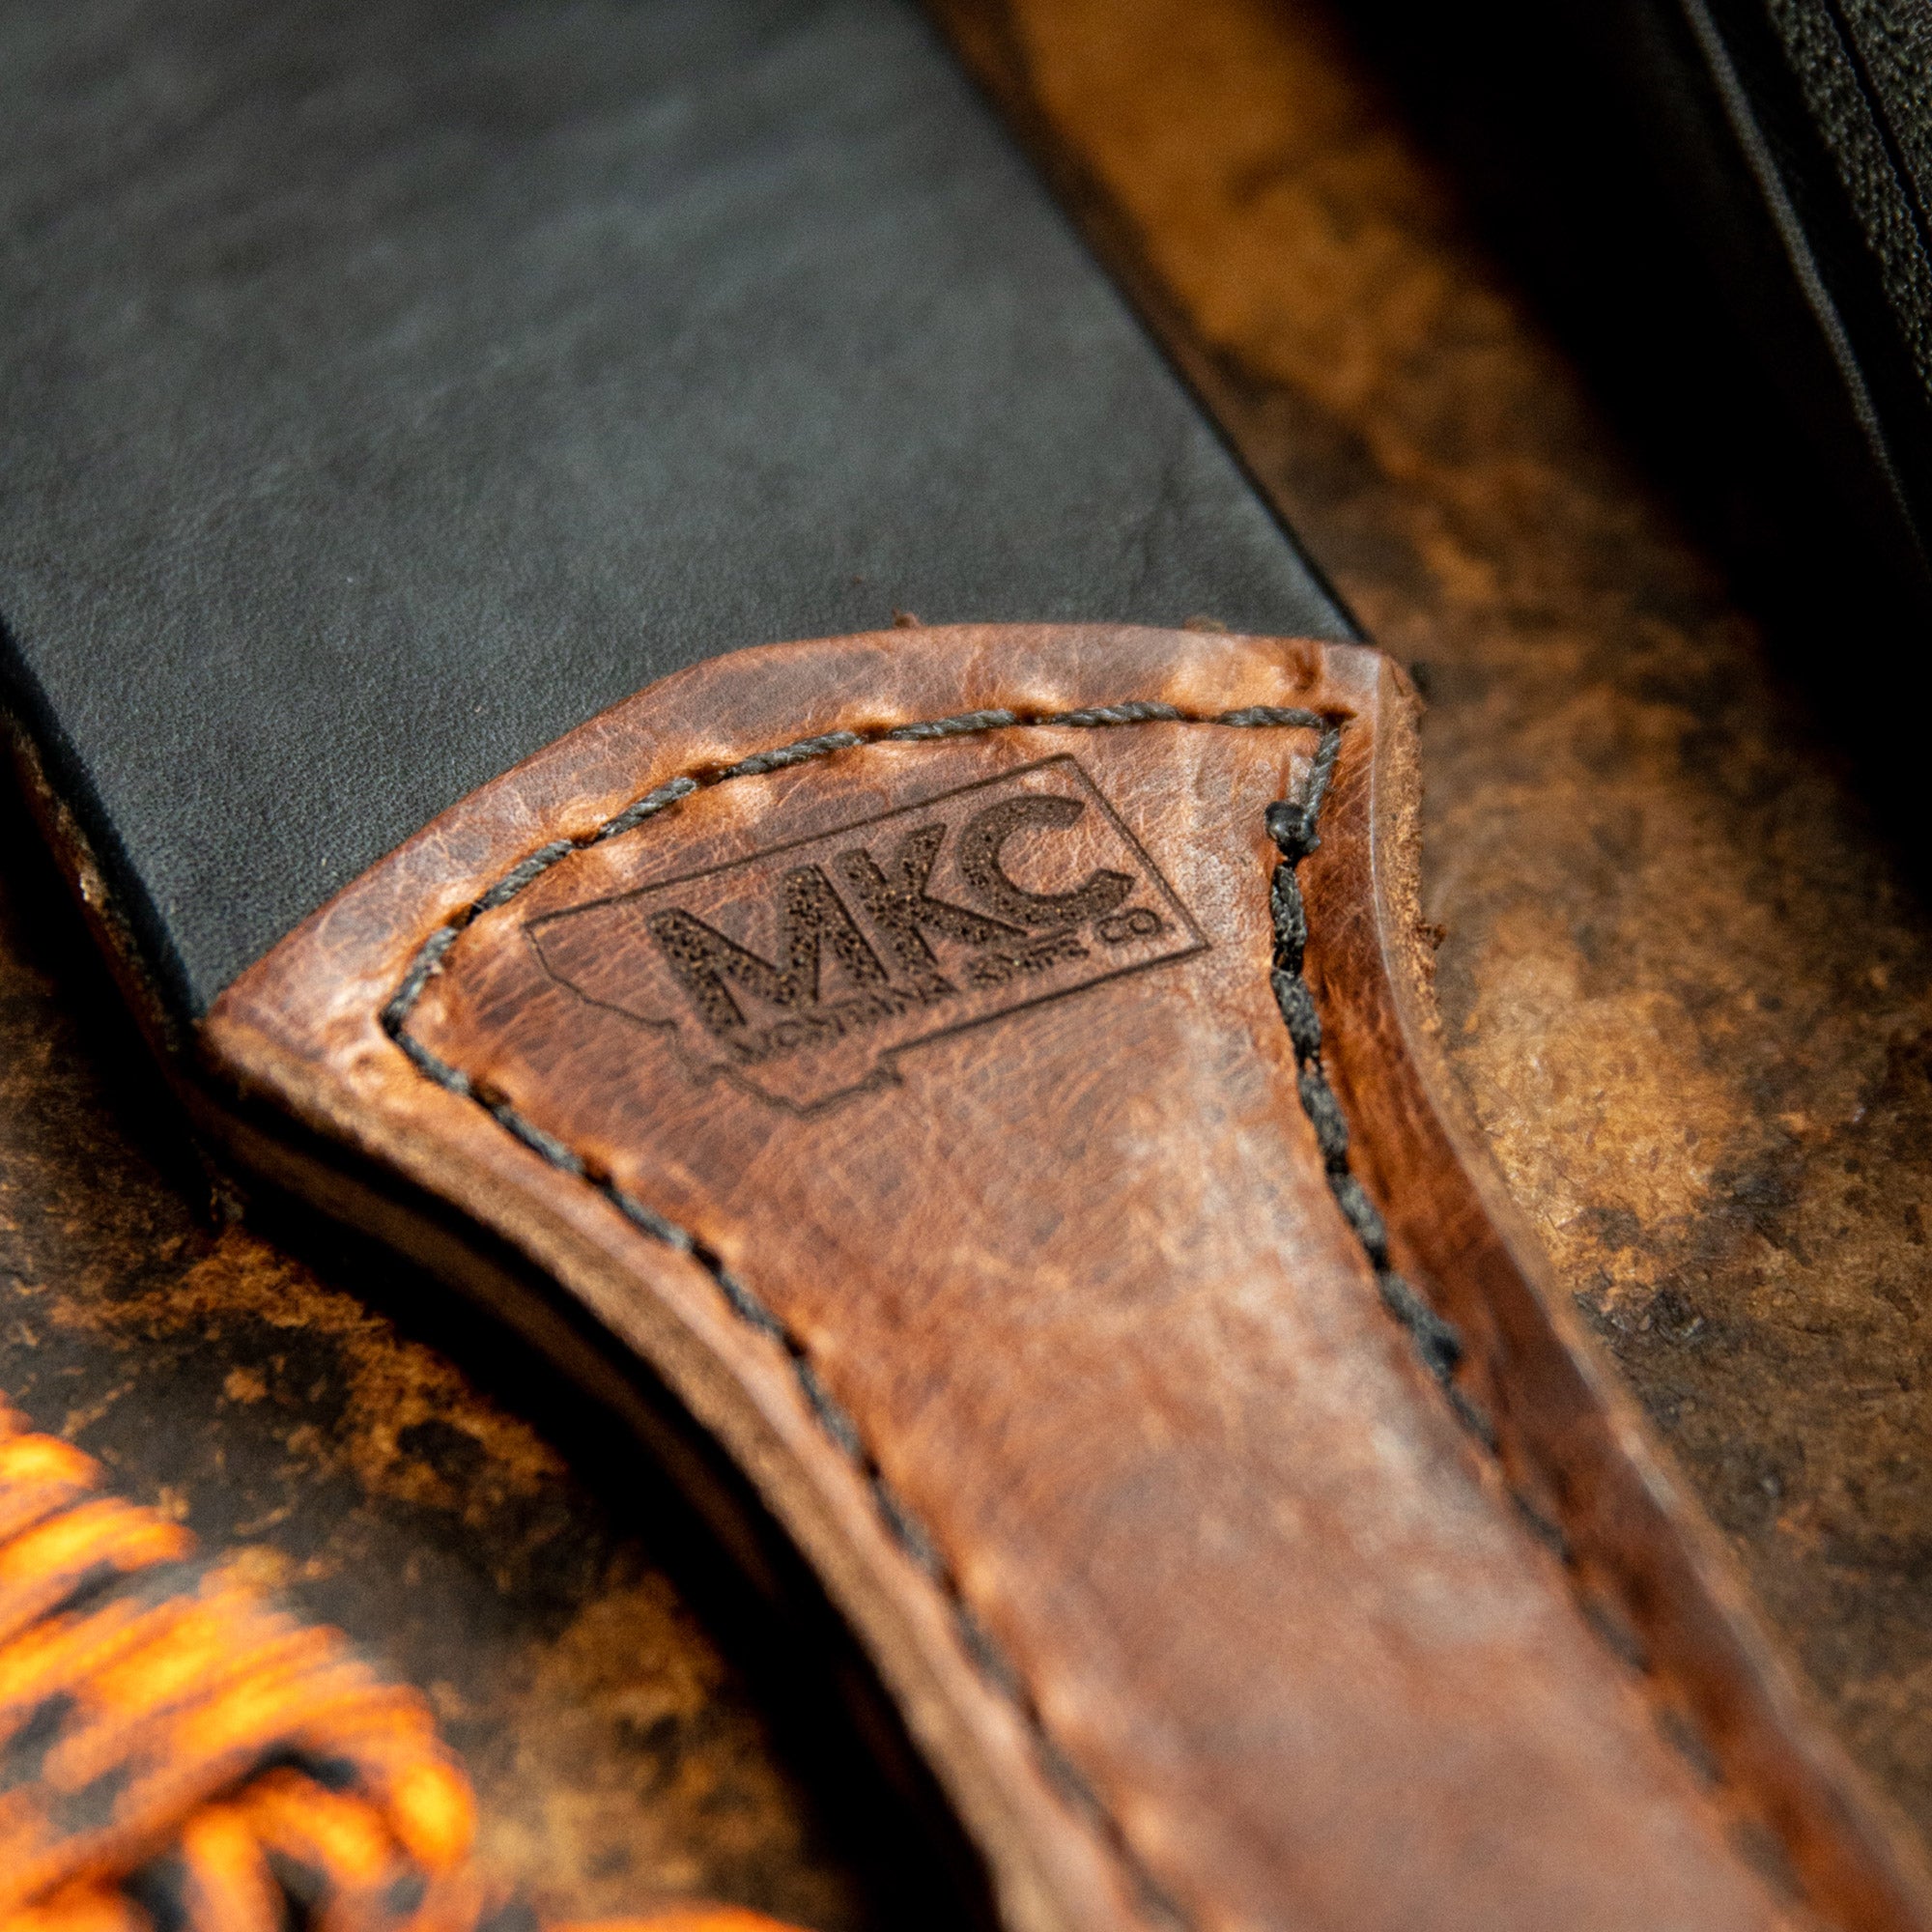 MKC LEATHER STROP - USA MADE